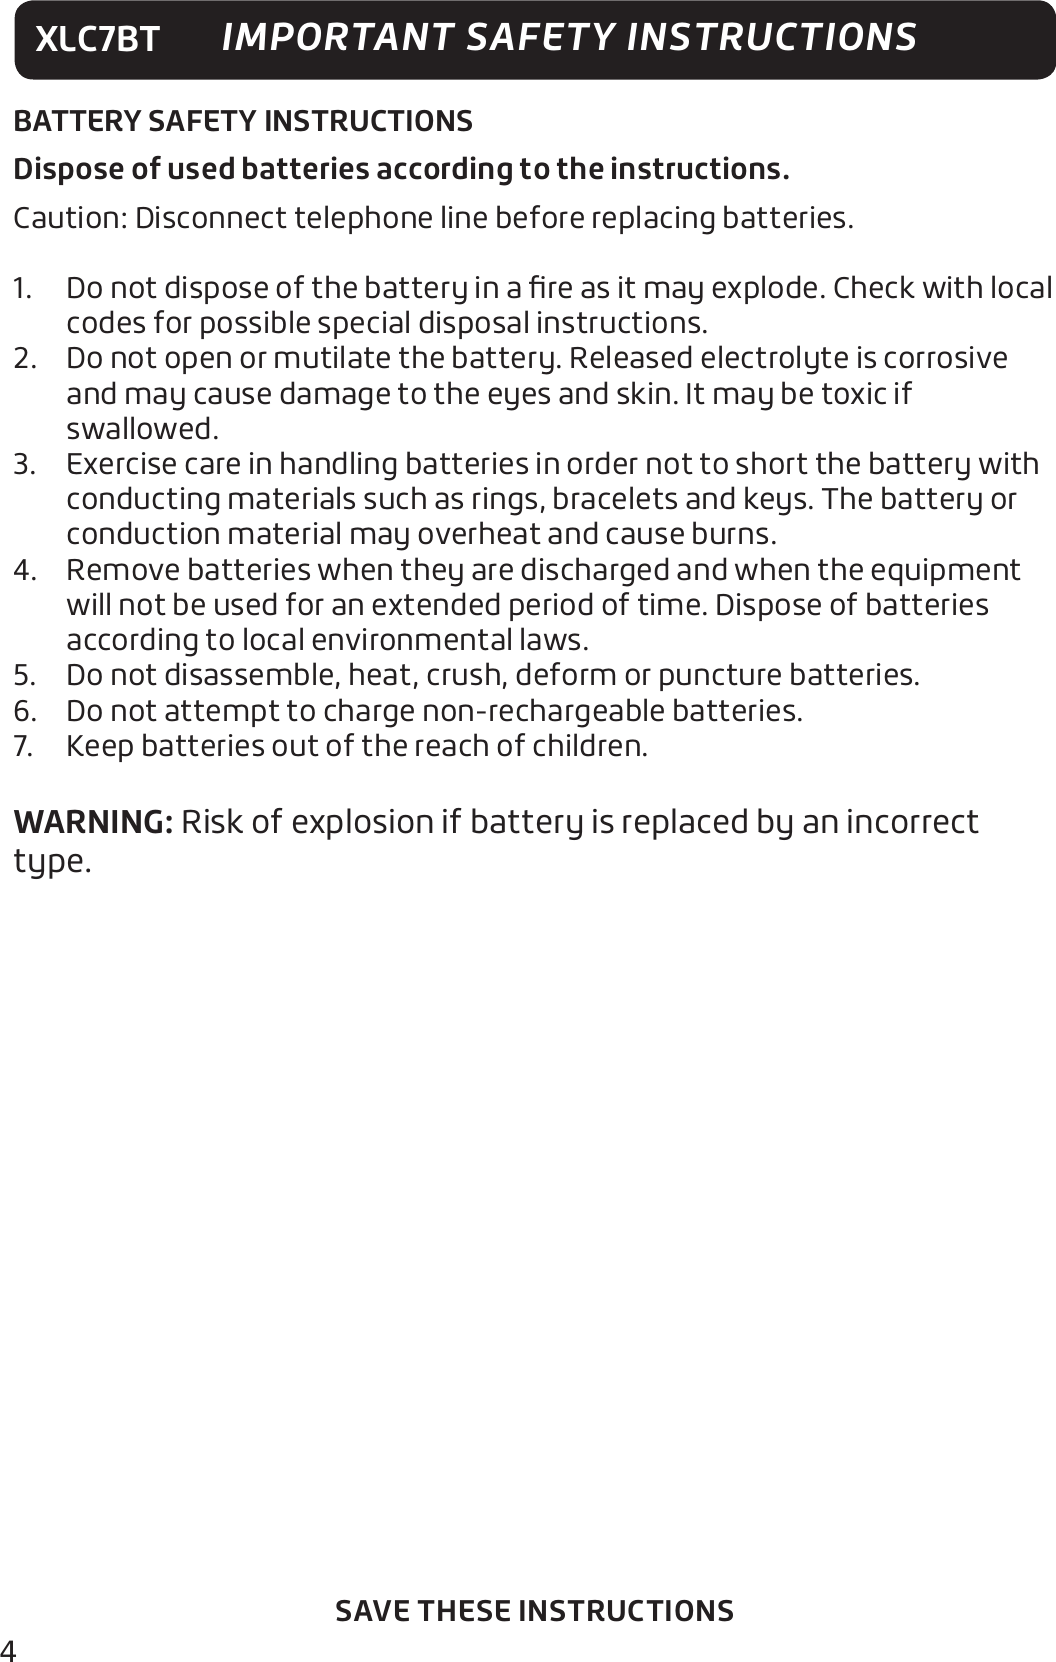 4XLC7BTSAVE THESE INSTRUCTIONSIMPORTANT SAFETY INSTRUCTIONSBATTERY SAFETY INSTRUCTIONSDispose of used batteries according to the instructions.Caution: Disconnect telephone line before replacing batteries.1.  Do not dispose of the battery in a ﬁre as it may explode. Check with local codes for possible special disposal instructions.2.  Do not open or mutilate the battery. Released electrolyte is corrosive and may cause damage to the eyes and skin. It may be toxic if swallowed.3.  Exercise care in handling batteries in order not to short the battery with conducting materials such as rings, bracelets and keys. The battery or conduction material may overheat and cause burns.4.  Remove batteries when they are discharged and when the equipment will not be used for an extended period of time. Dispose of batteries according to local environmental laws.5.  Do not disassemble, heat, crush, deform or puncture batteries.6.  Do not attempt to charge non-rechargeable batteries.7.  Keep batteries out of the reach of children.WARNING: Risk of explosion if battery is replaced by an incorrect type.